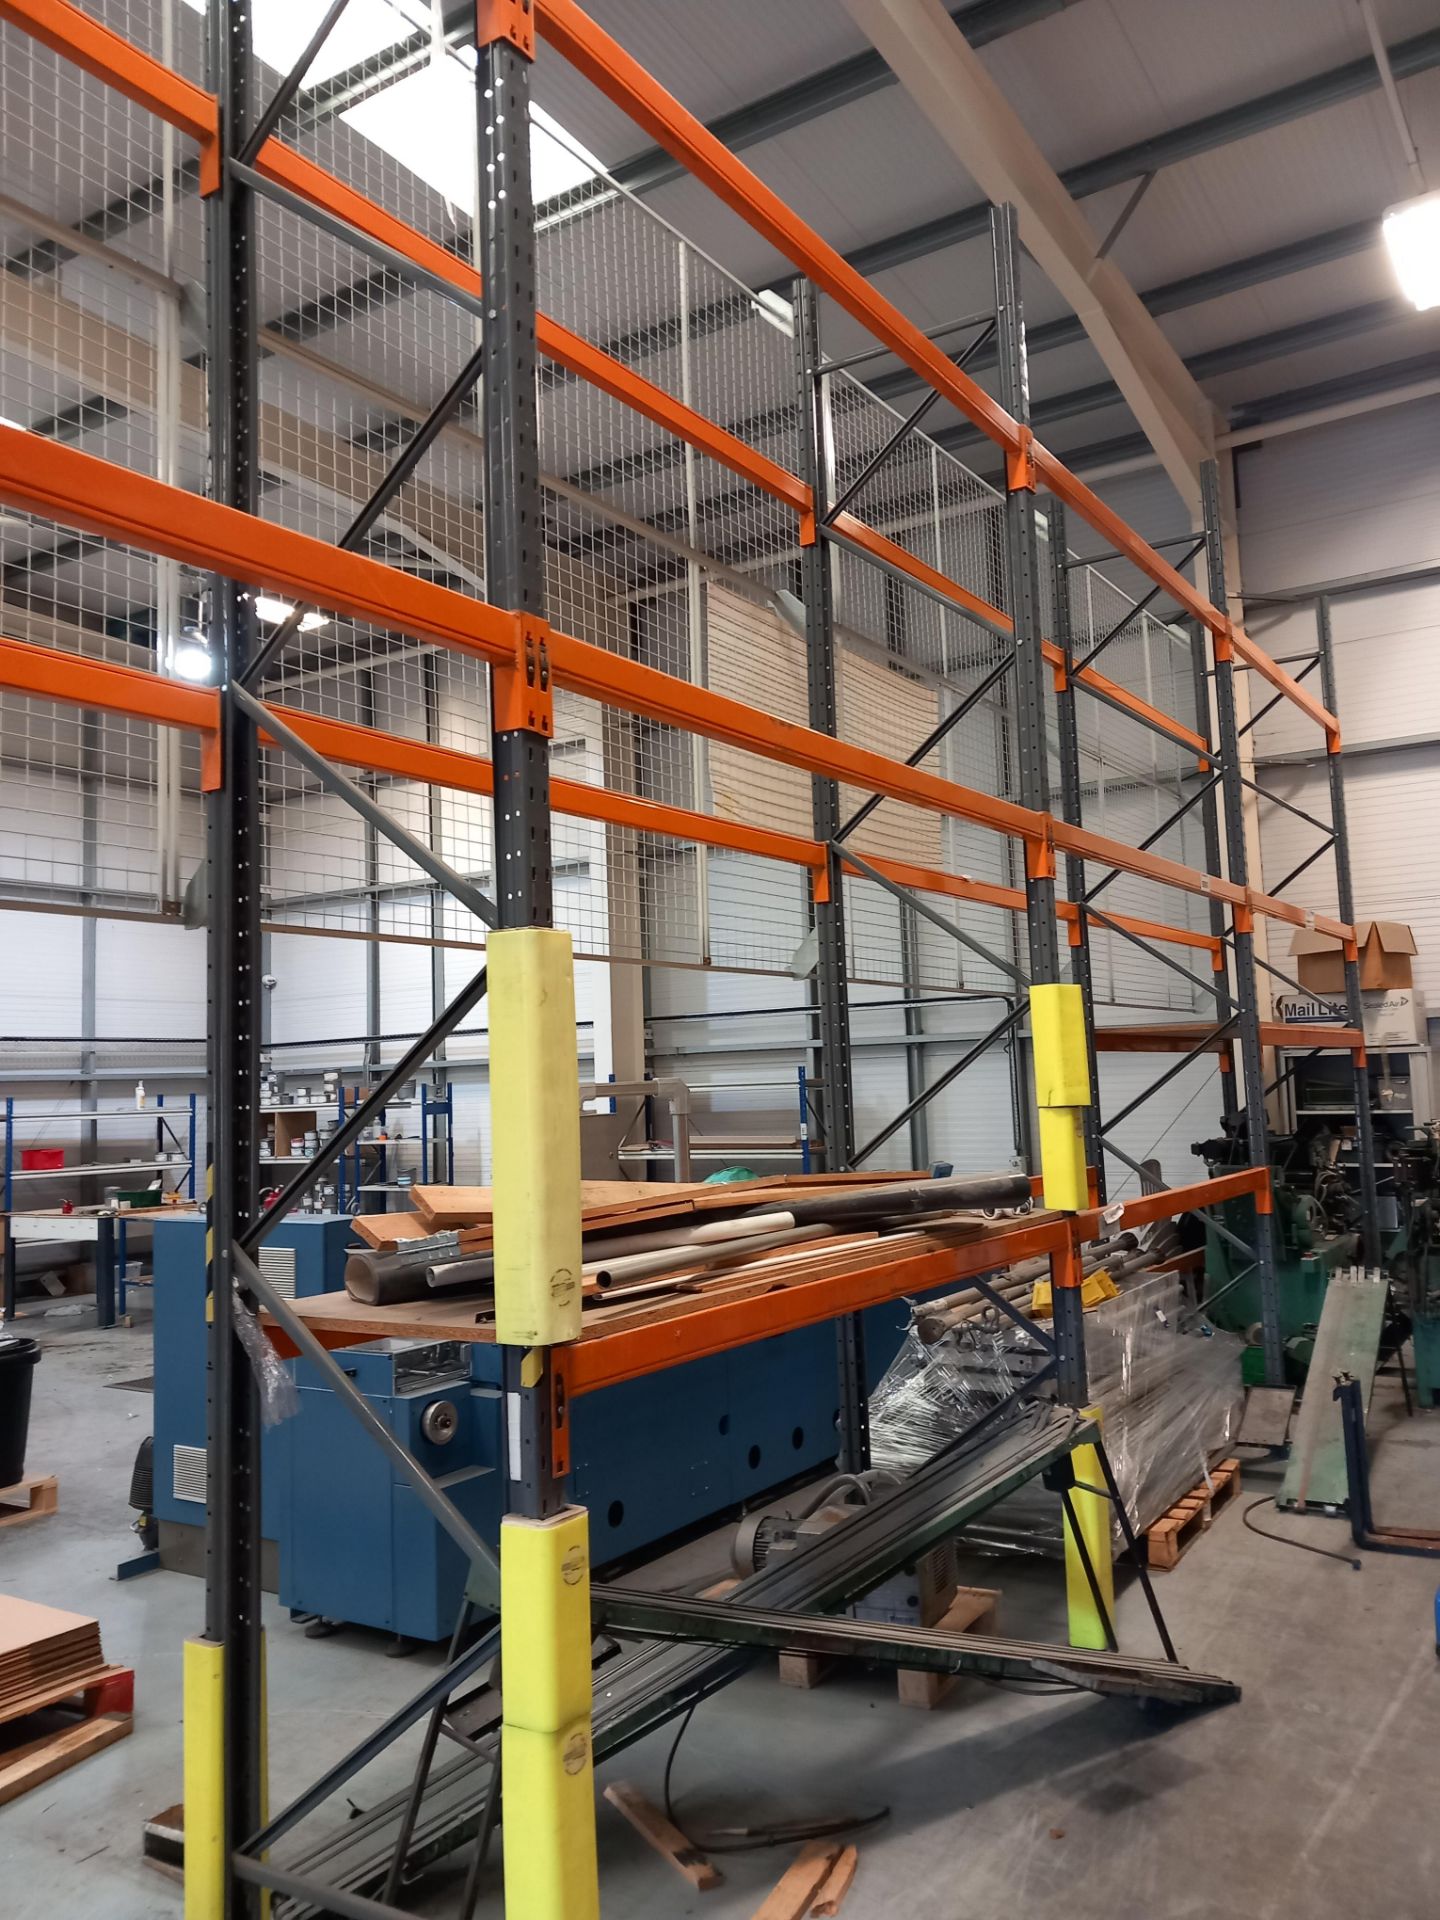 16 Bays of Dexion Speedlock boltless steel pallet racking with spare beams & guard railing & shelf - Image 3 of 9